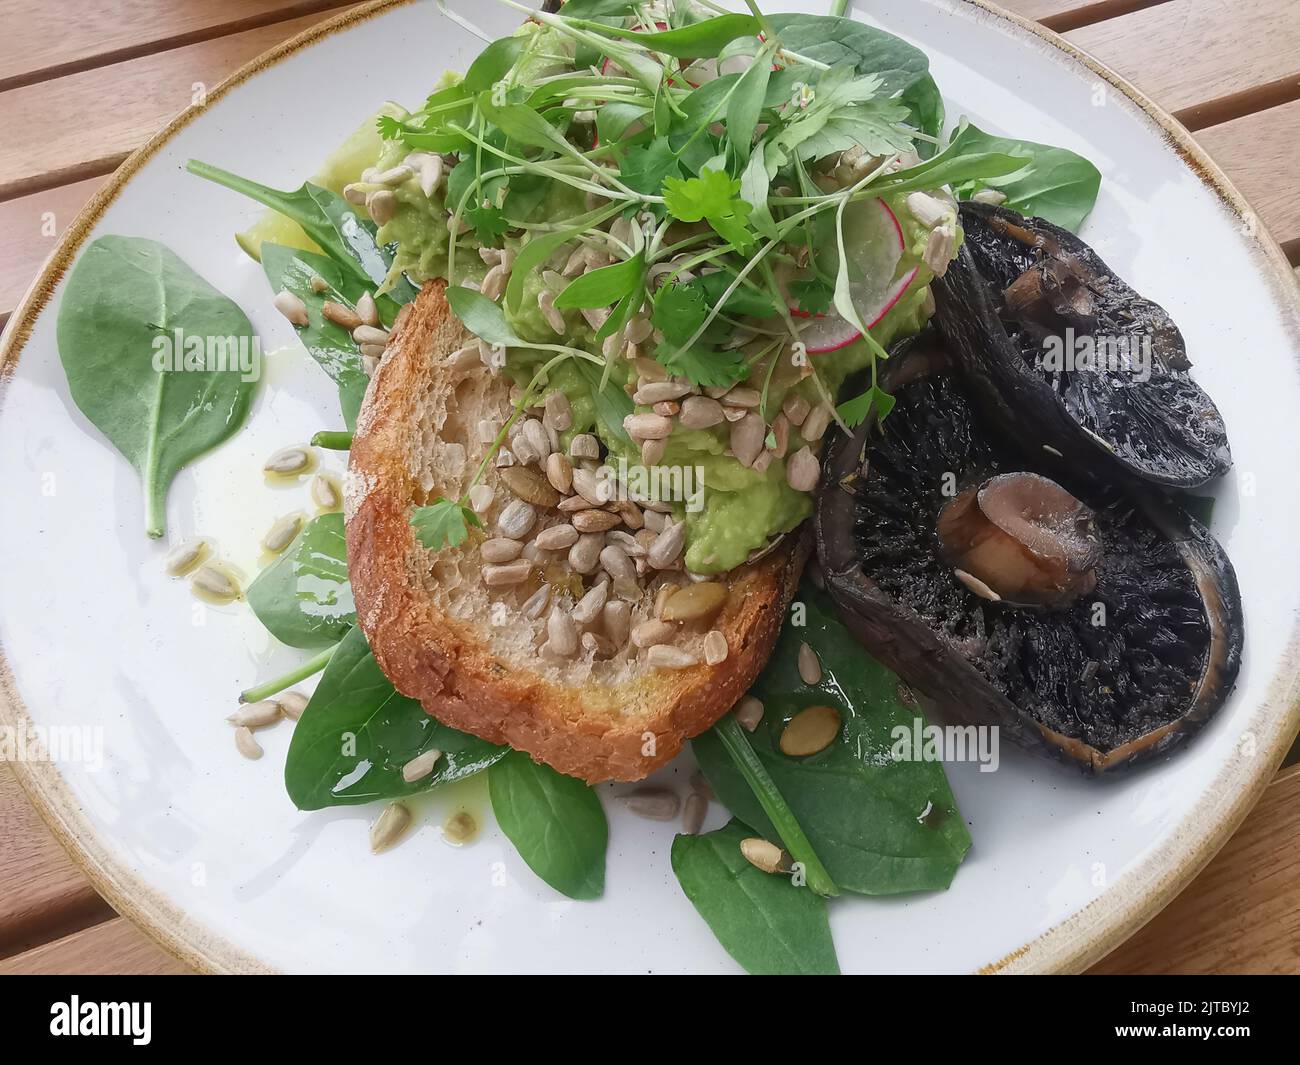 Plant based meal of mashed avocado on sourdough with mushrooms Stock Photo